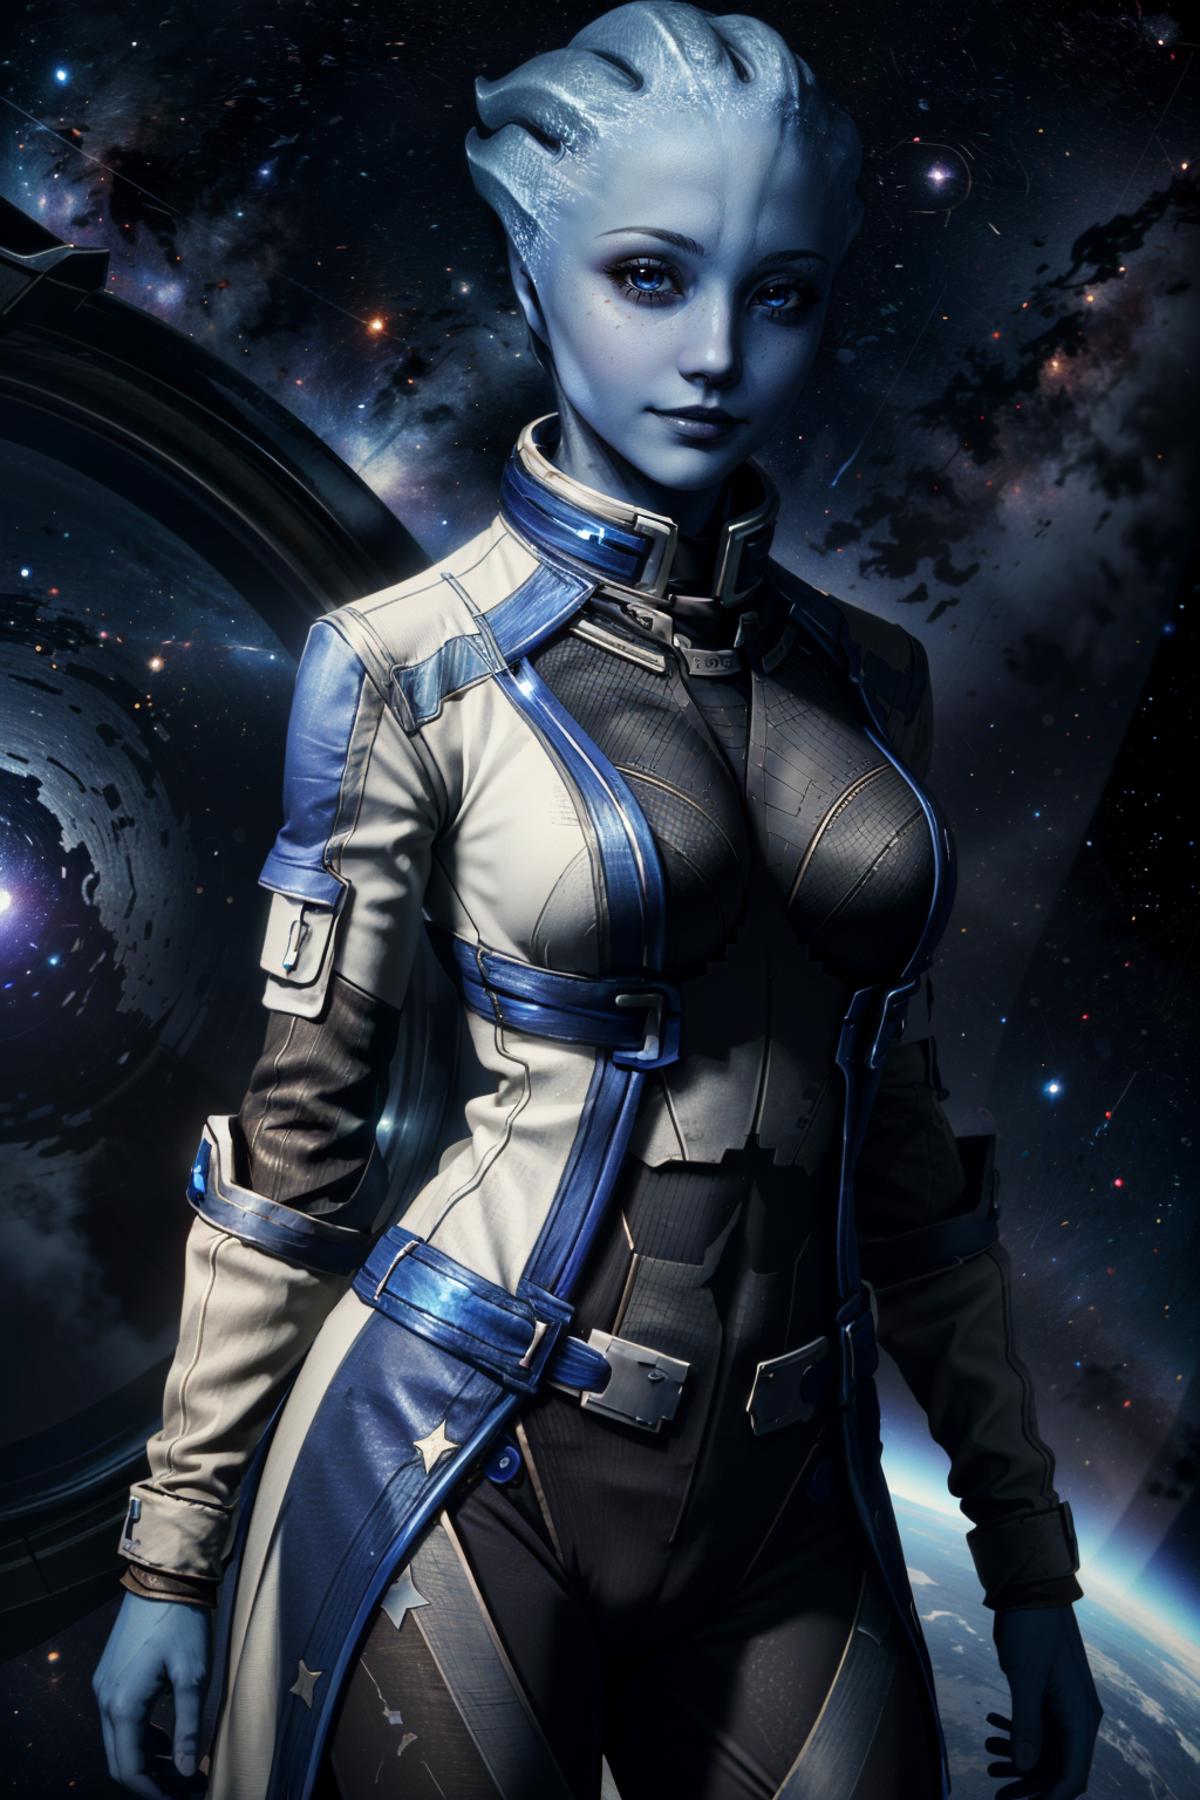 Liara from Mass Effect image by BloodRedKittie